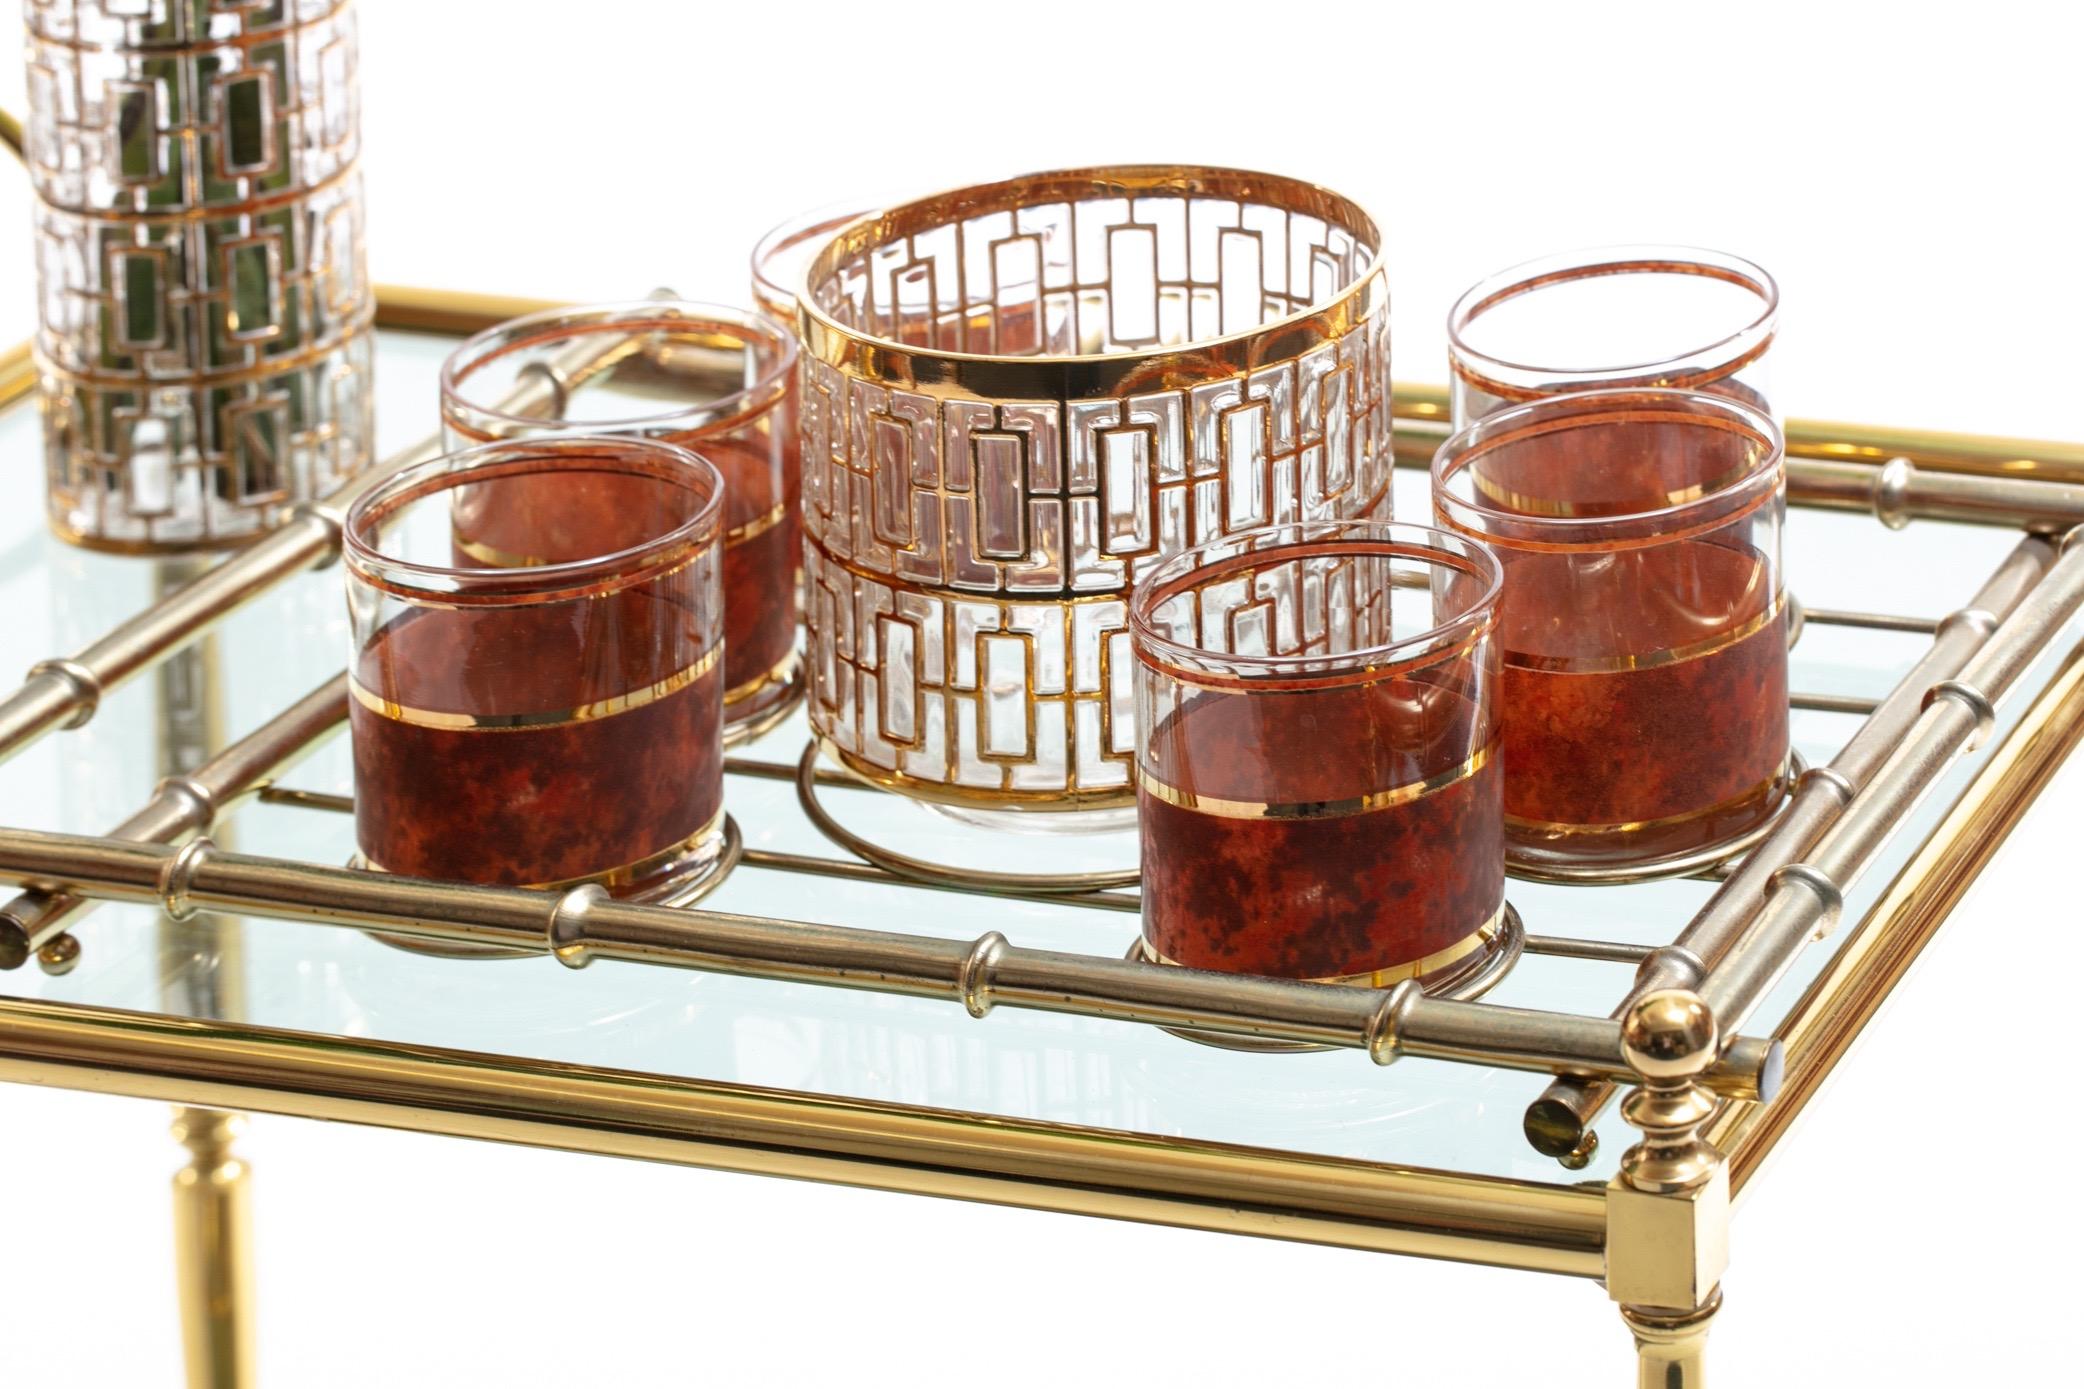 Beautiful and elegant mixed Hollywood Regency Mid-Century Modern barware set featuring 22-karat gold hand painted ice bucket by Imperial Glass in the famed Shoji pattern, six rocks glasses with 22-karat gold plated detail and faux suede finish, and